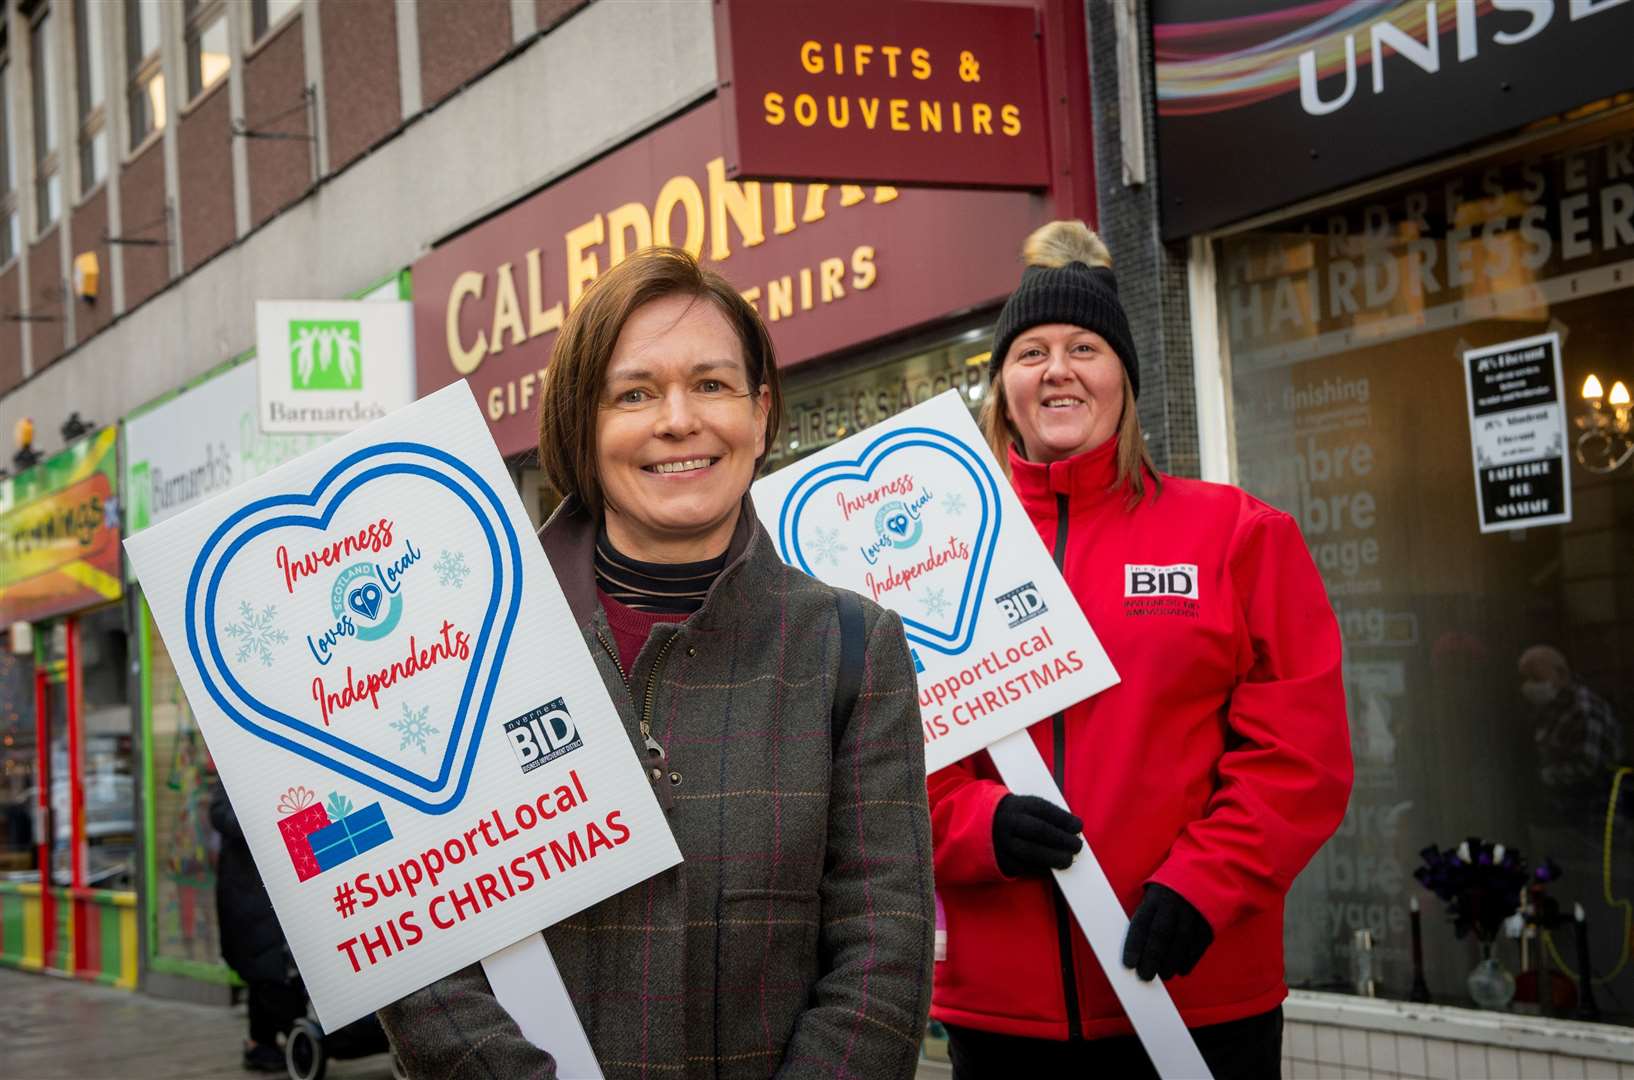 Margaret Laws and Janice Worthing, who have been promoted into new roles at Inverness BID, during a previous campaign.